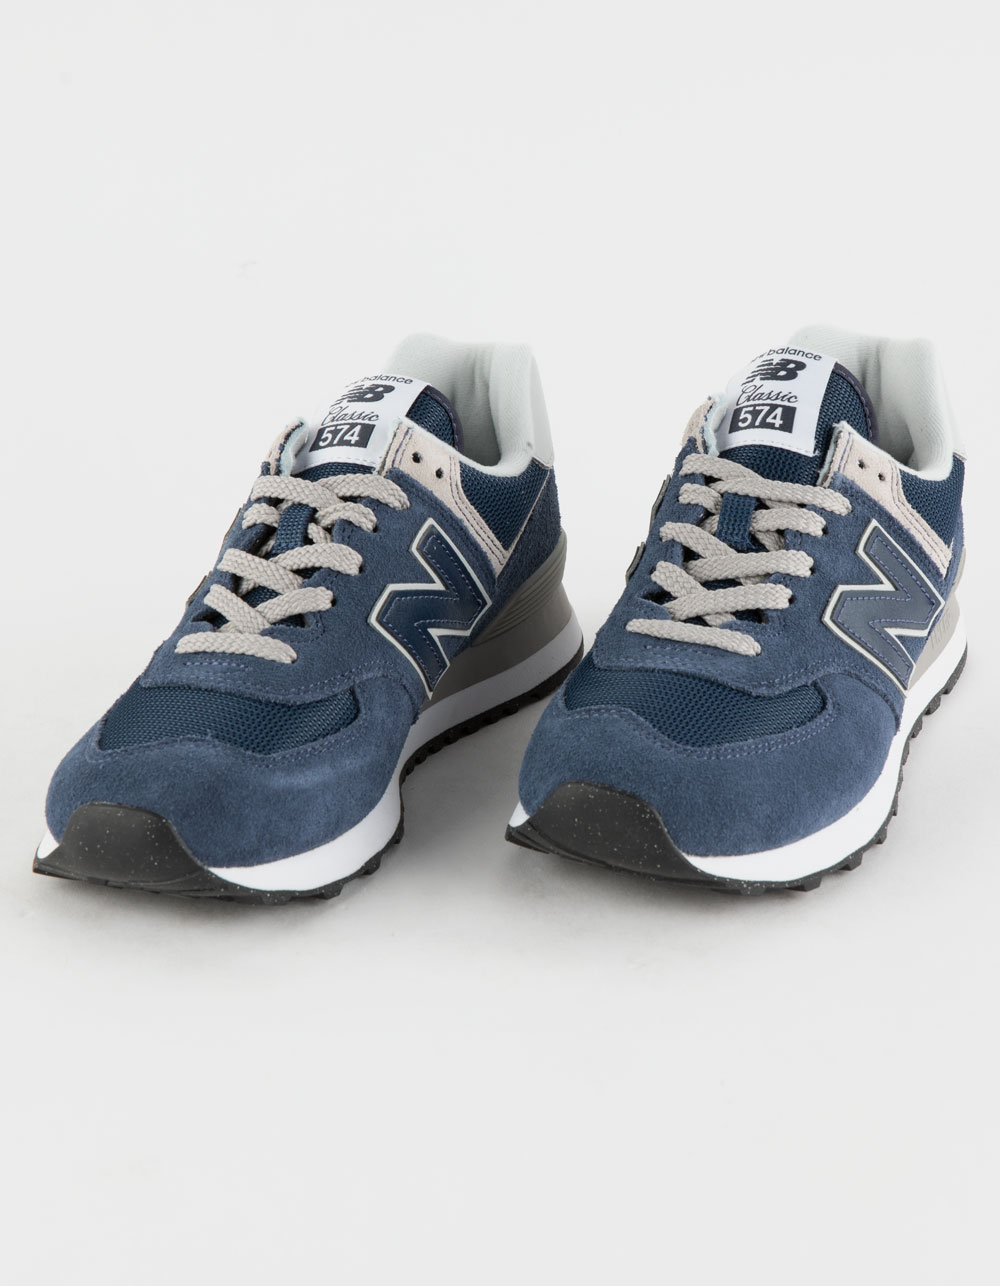 NEW BALANCE 574 Womens Shoes - NAVY/WHITE | Tillys